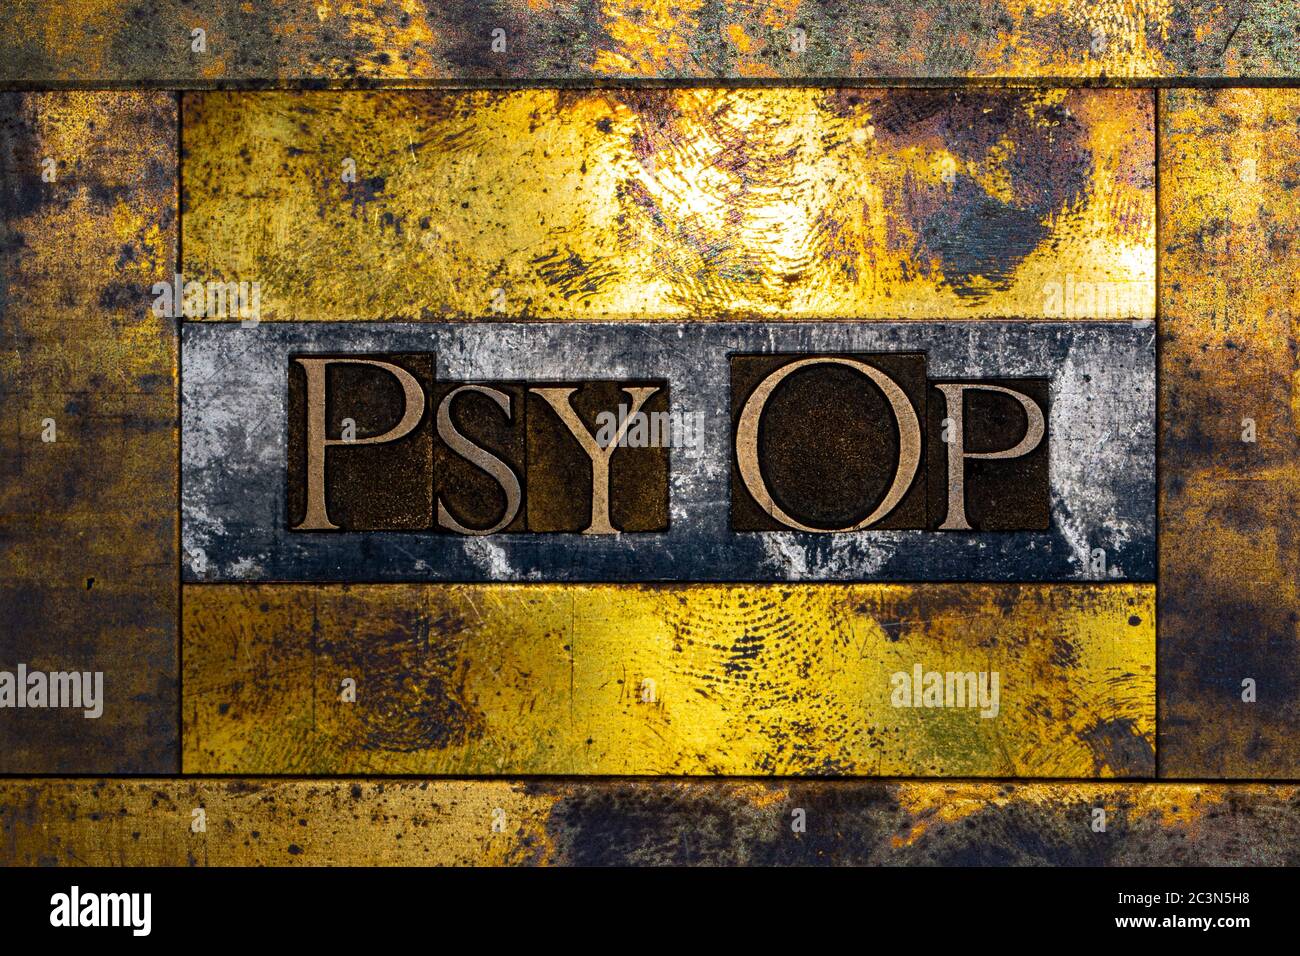 Psy Op text formed with real authentic typeset letters on vintage textured silver grunge copper and gold background Stock Photo